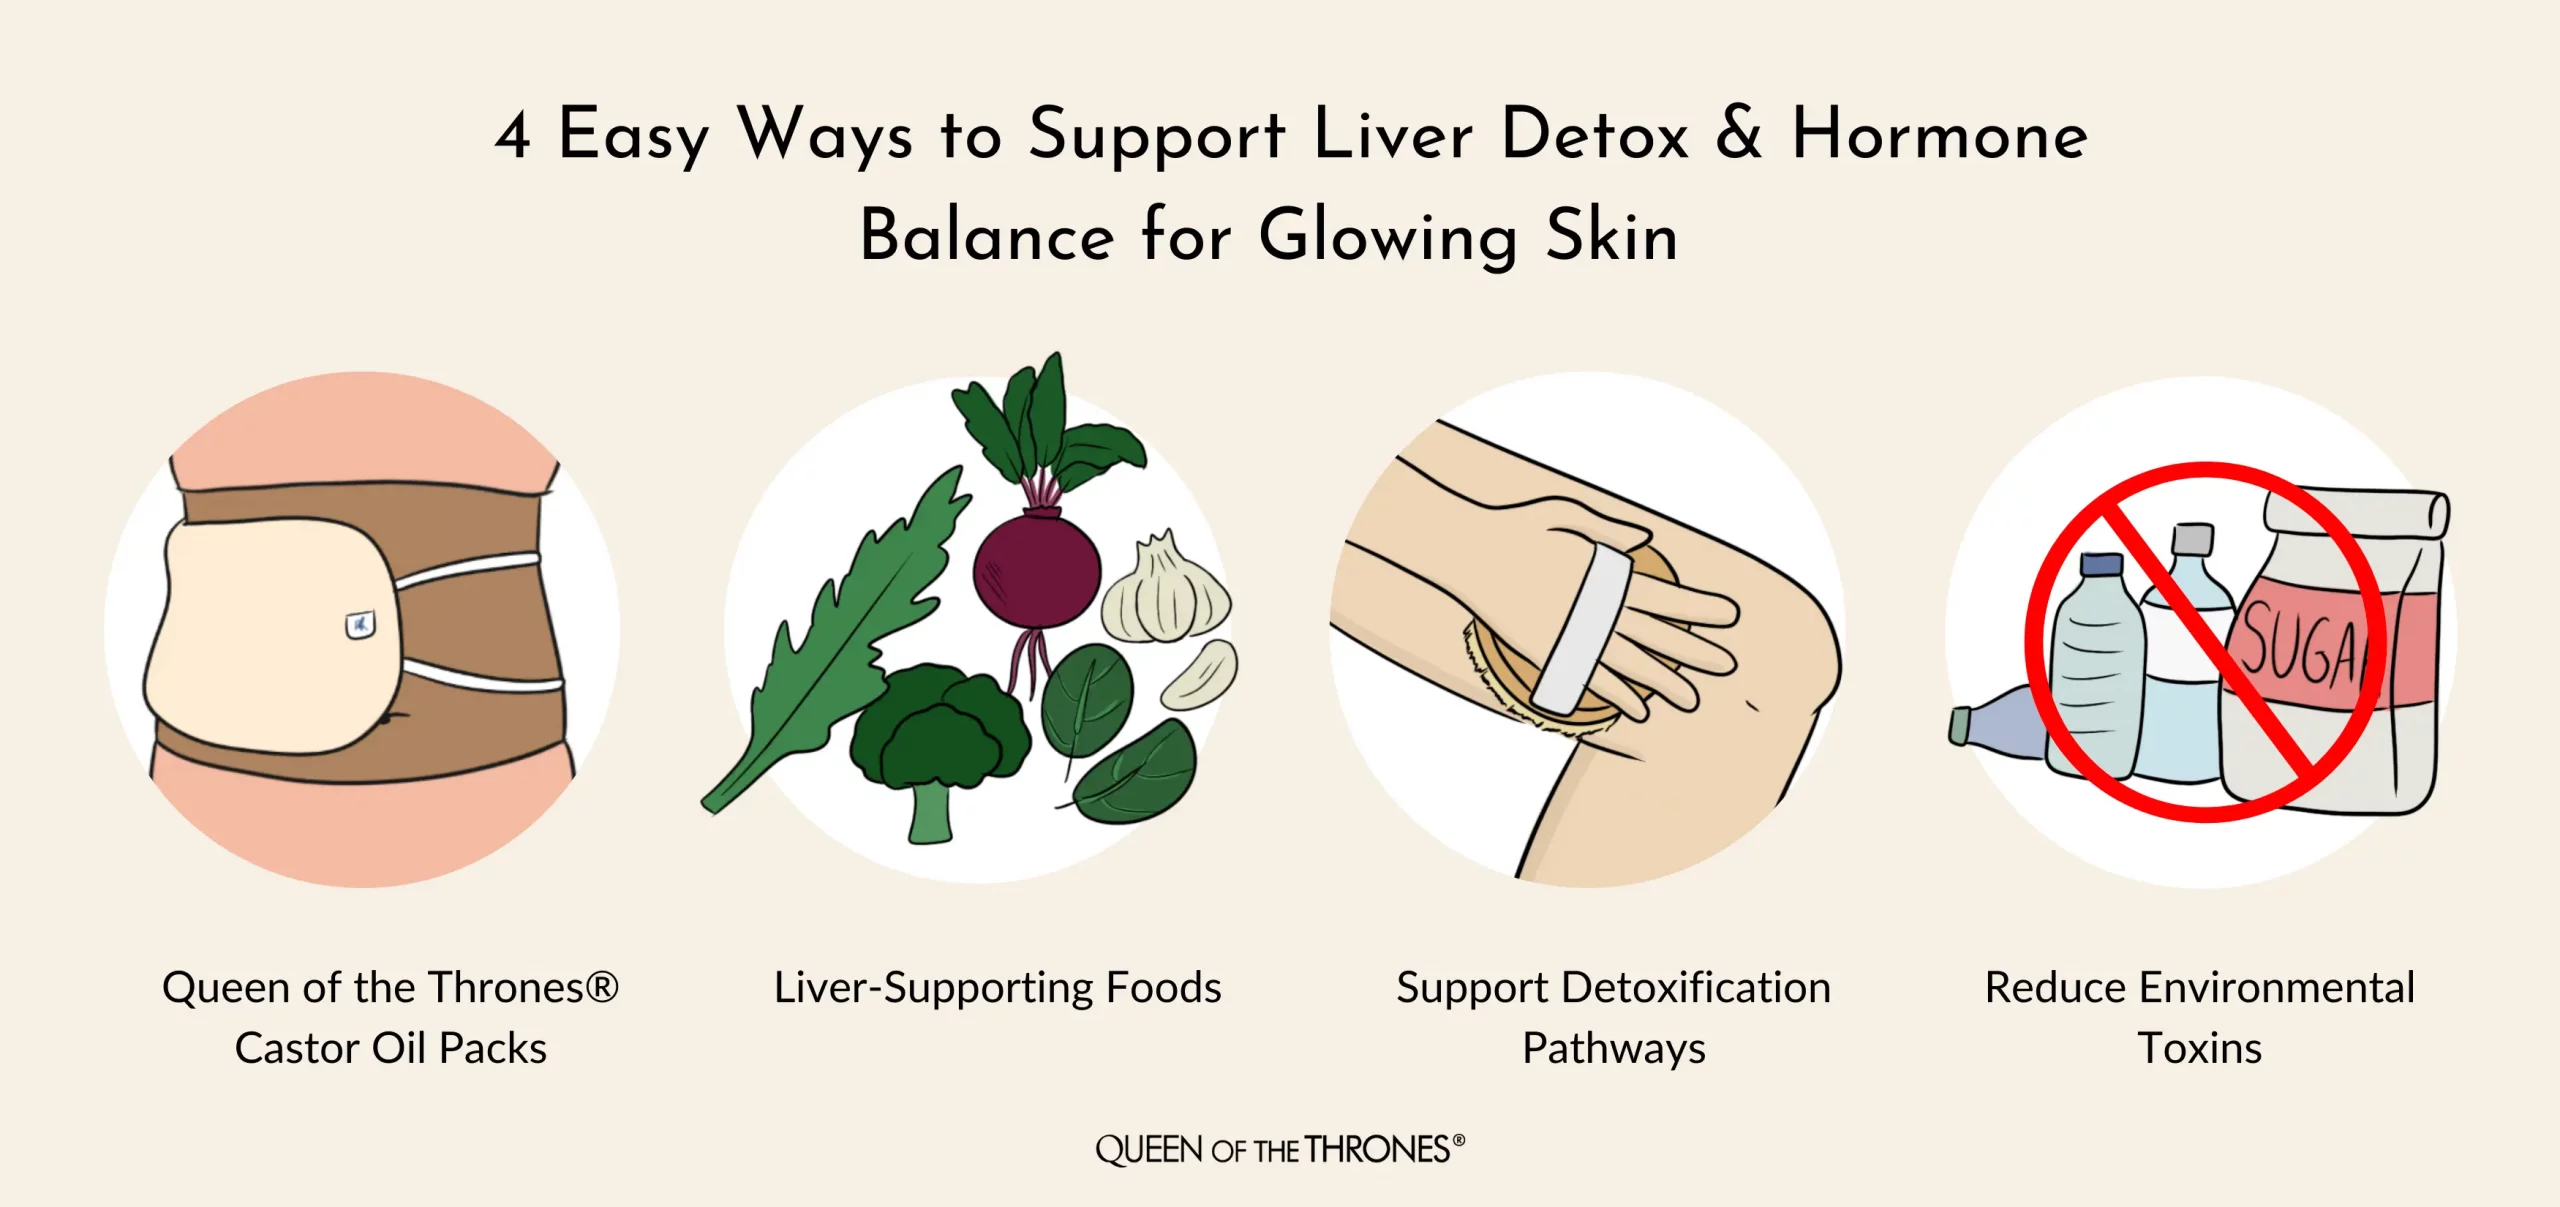 Easy Ways to Support Liver Detox and Hormone Balance for Glowing Skin with Queen of the Thrones Castor Oil Packs